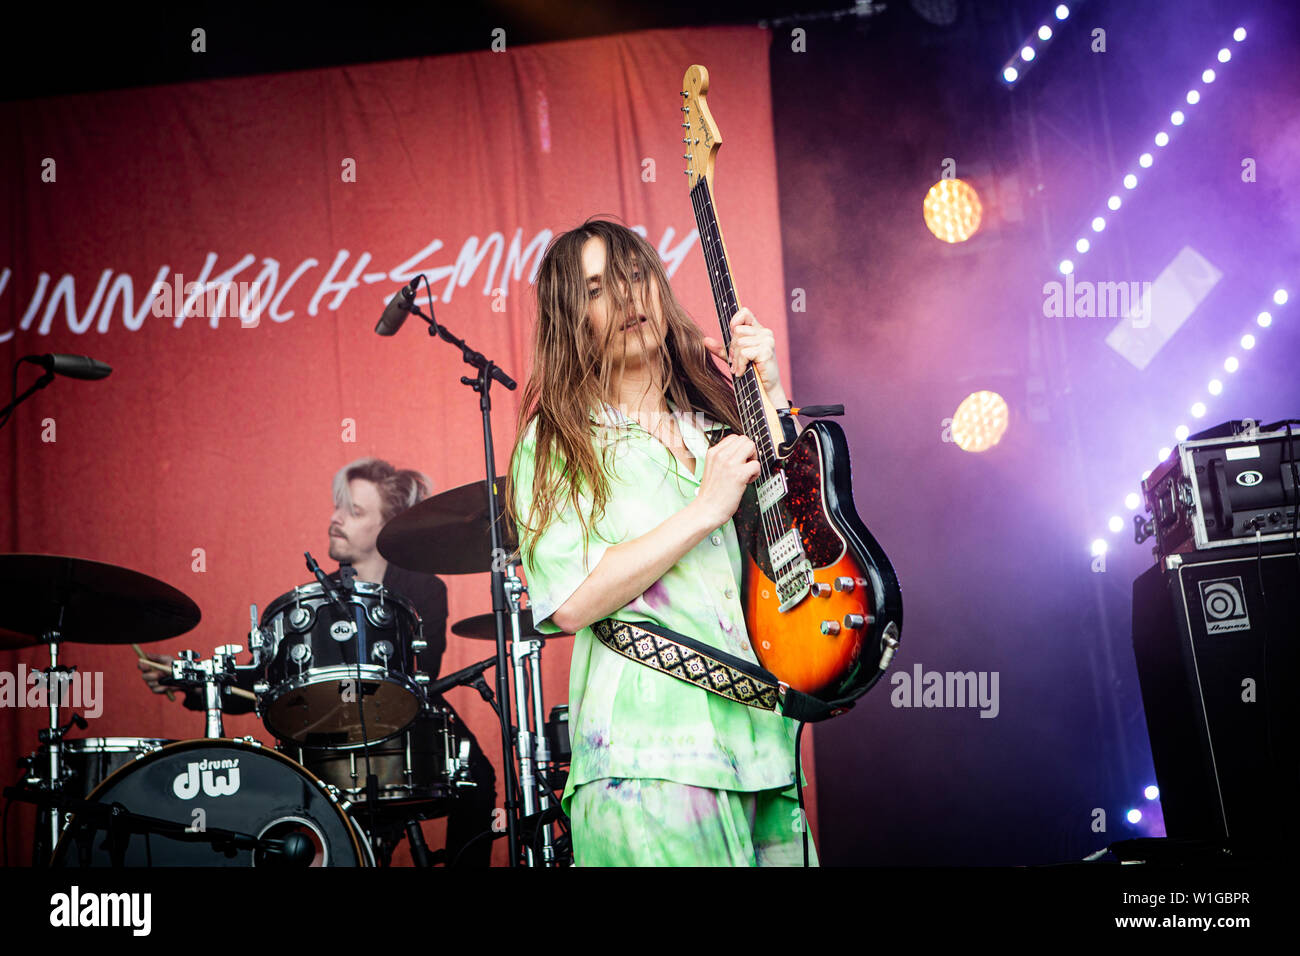 Roskilde, Denmark. July 2nd, 2019. The Swedish singer and musician Linn Koch-Emmery performs a live concert during the Danish music festival Roskilde Festival 2019. (Photo credit: Gonzales Photo - Christian Hjorth). Stock Photo